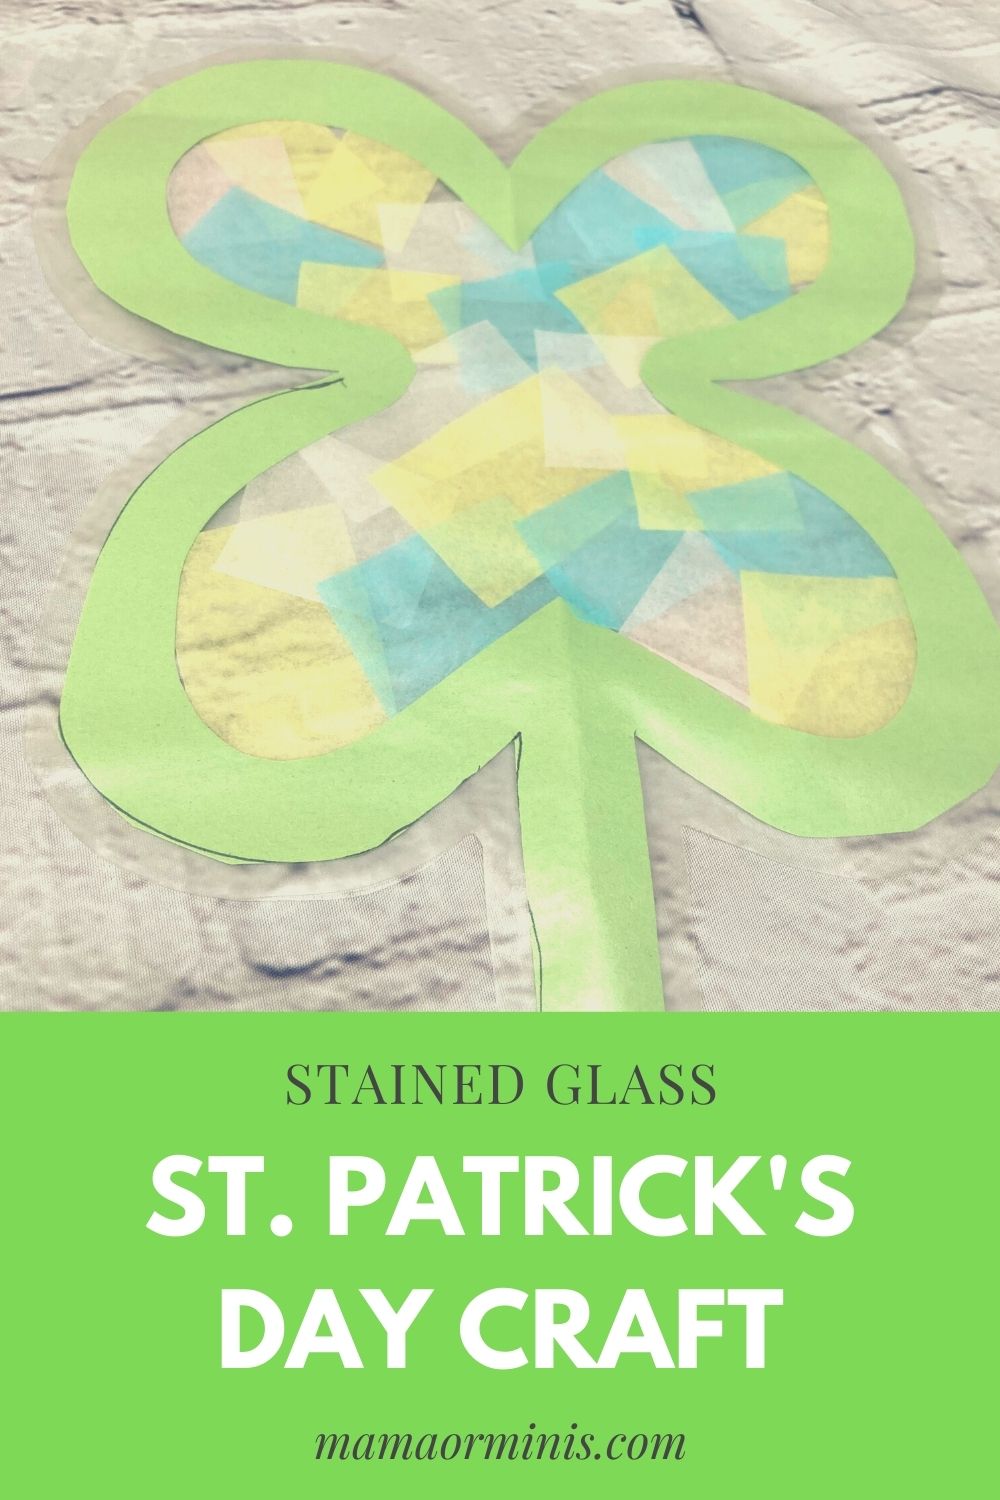 Stained Glass St. Patrick's Day Craft